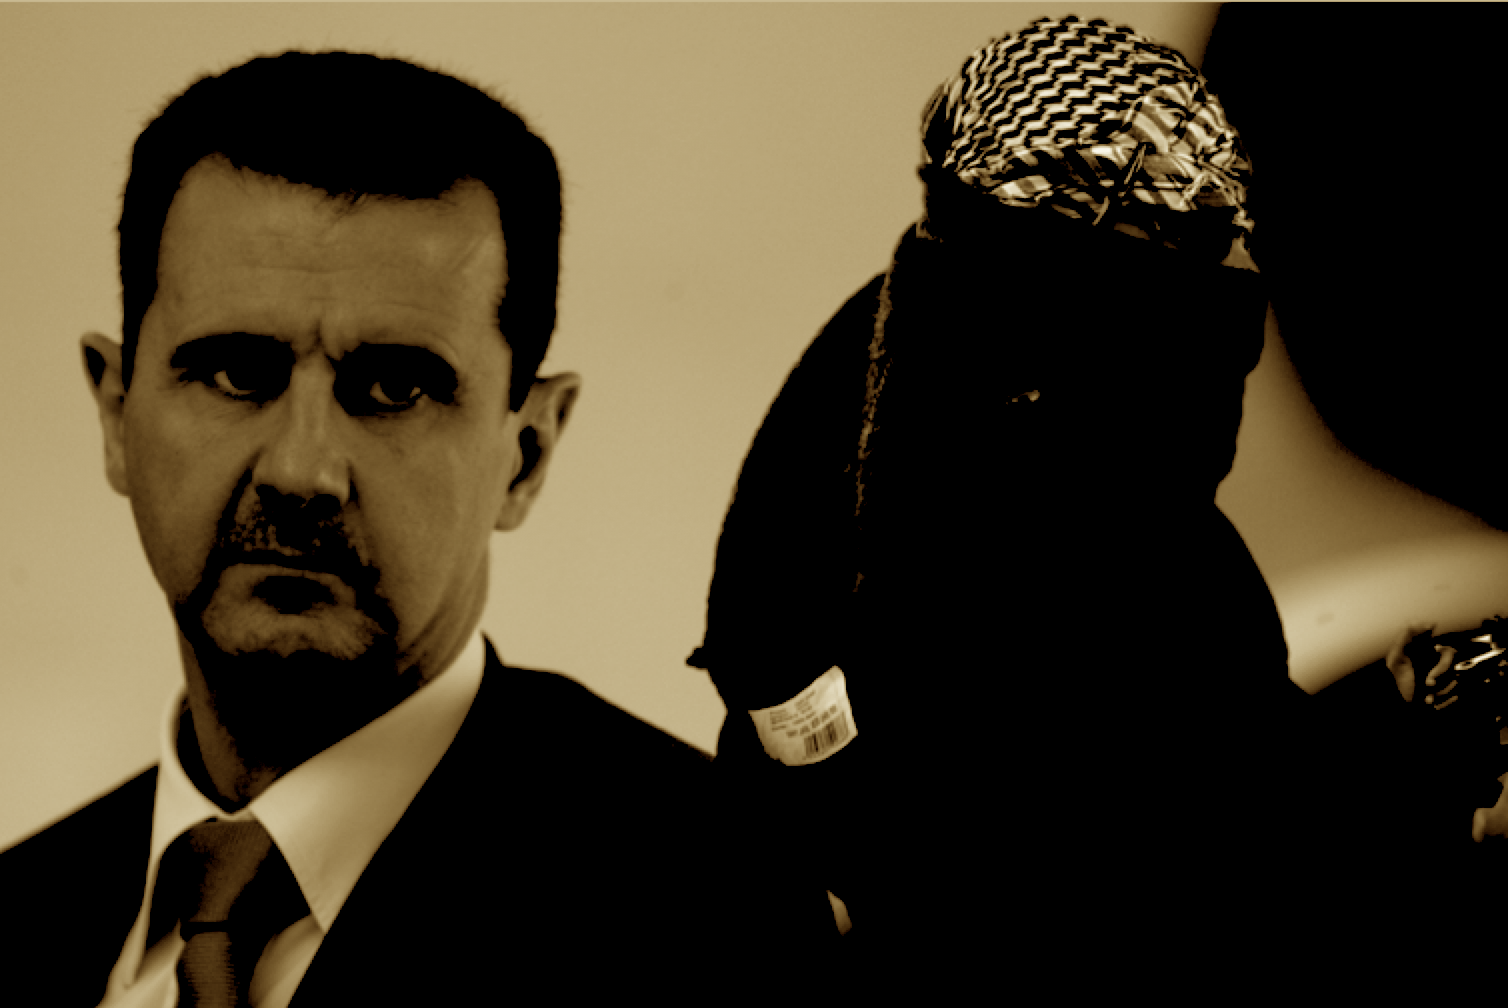 Assad and the rise of ISIS